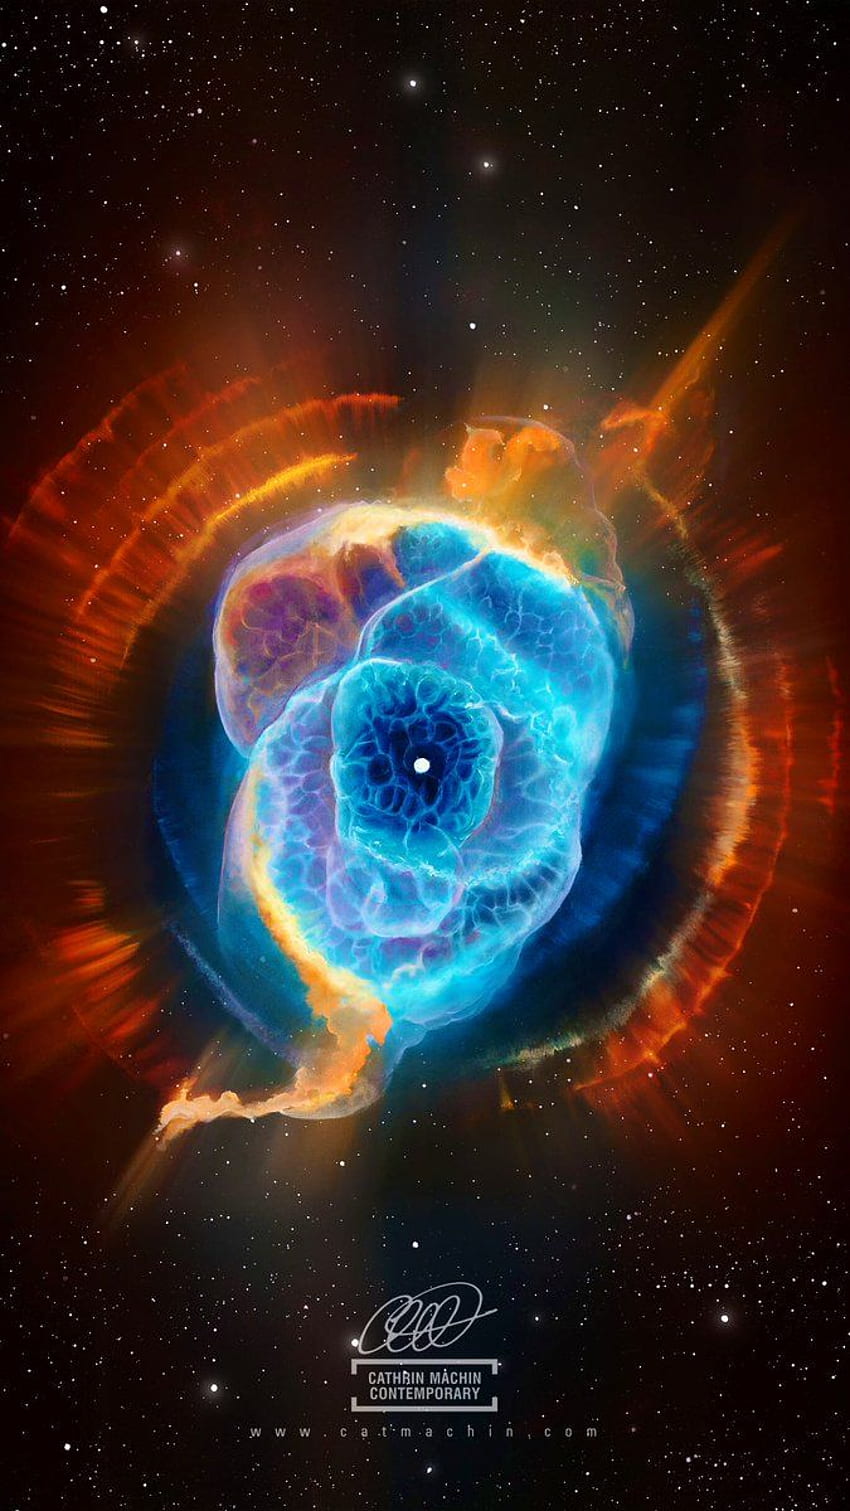 Cathrin Machin Space Art - Here's a phone of the cats eye nebula painting I made. Please be my guest and use this on your device if you want HD phone wallpaper